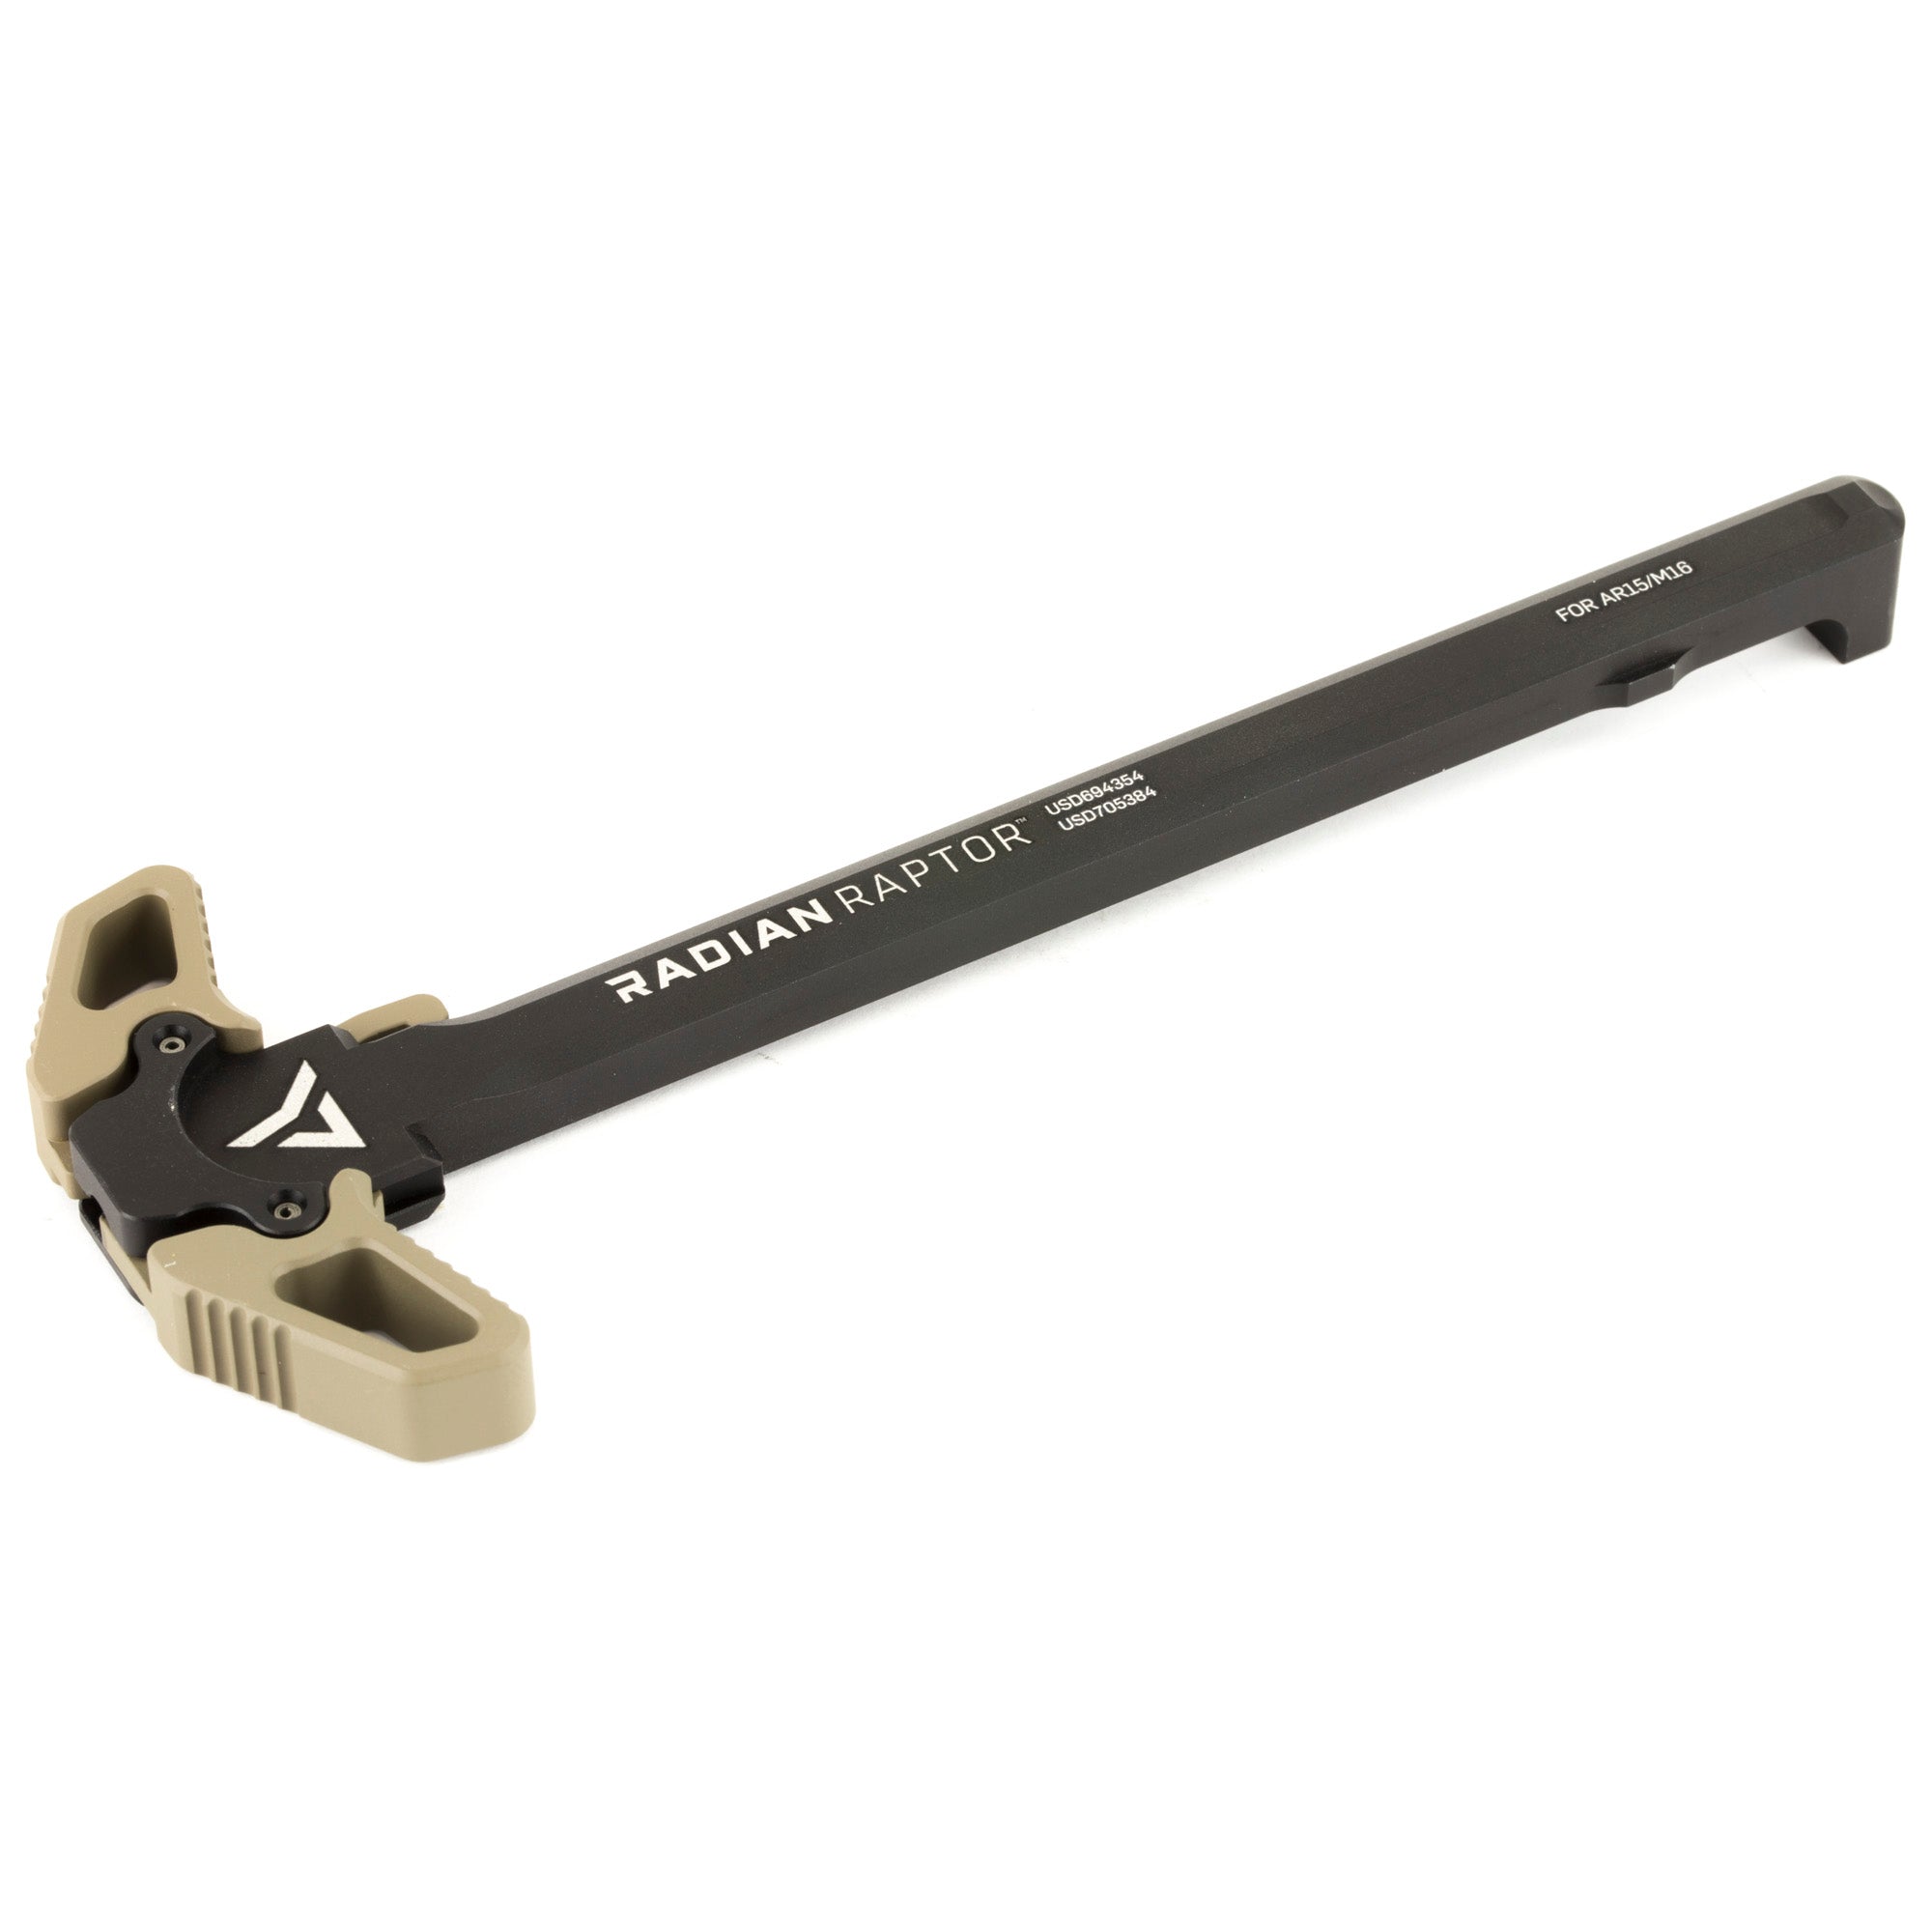 Flat Dark Earth AR-15 Raptor Ambidextrous Charging Handle, emphasizing its rugged appeal and user-friendly design for efficient firearm handling